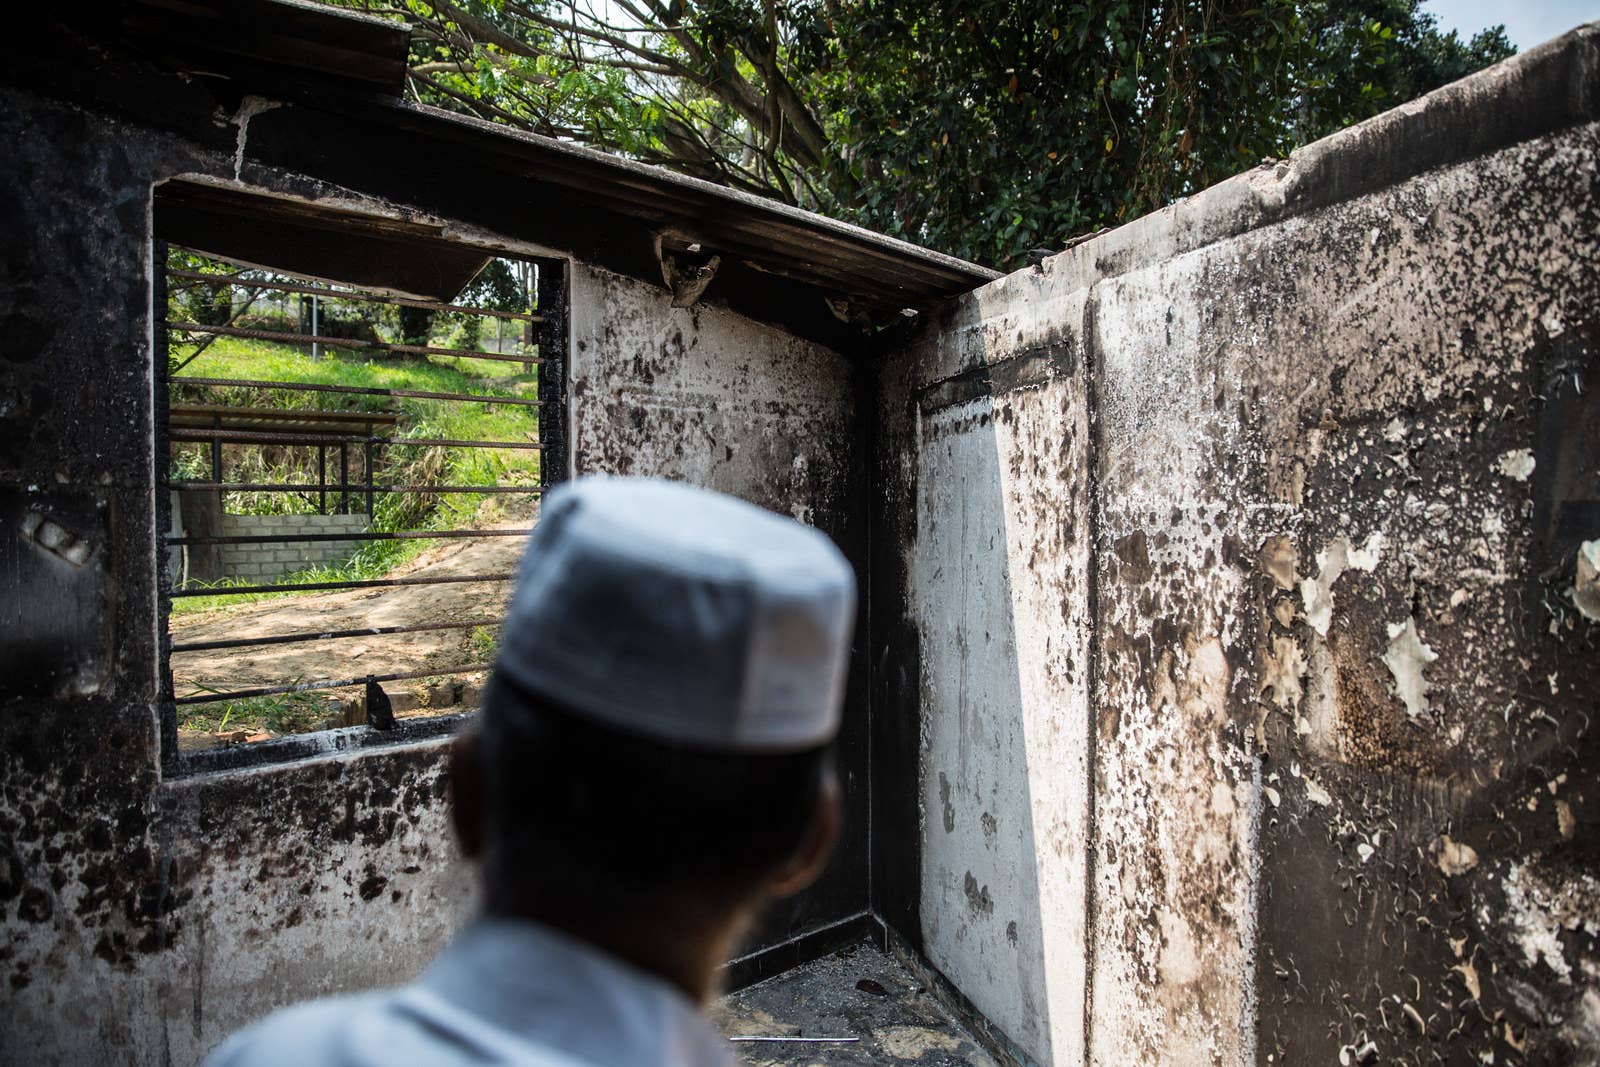 A man looks out of a burned out window at Masjidul Lafir Jummah Mosque in Digana. The attacks there were carried out by Buddhist mobs only a few weeks earlier on March 7, leaving many homes and shops destroyed and one young man dead.